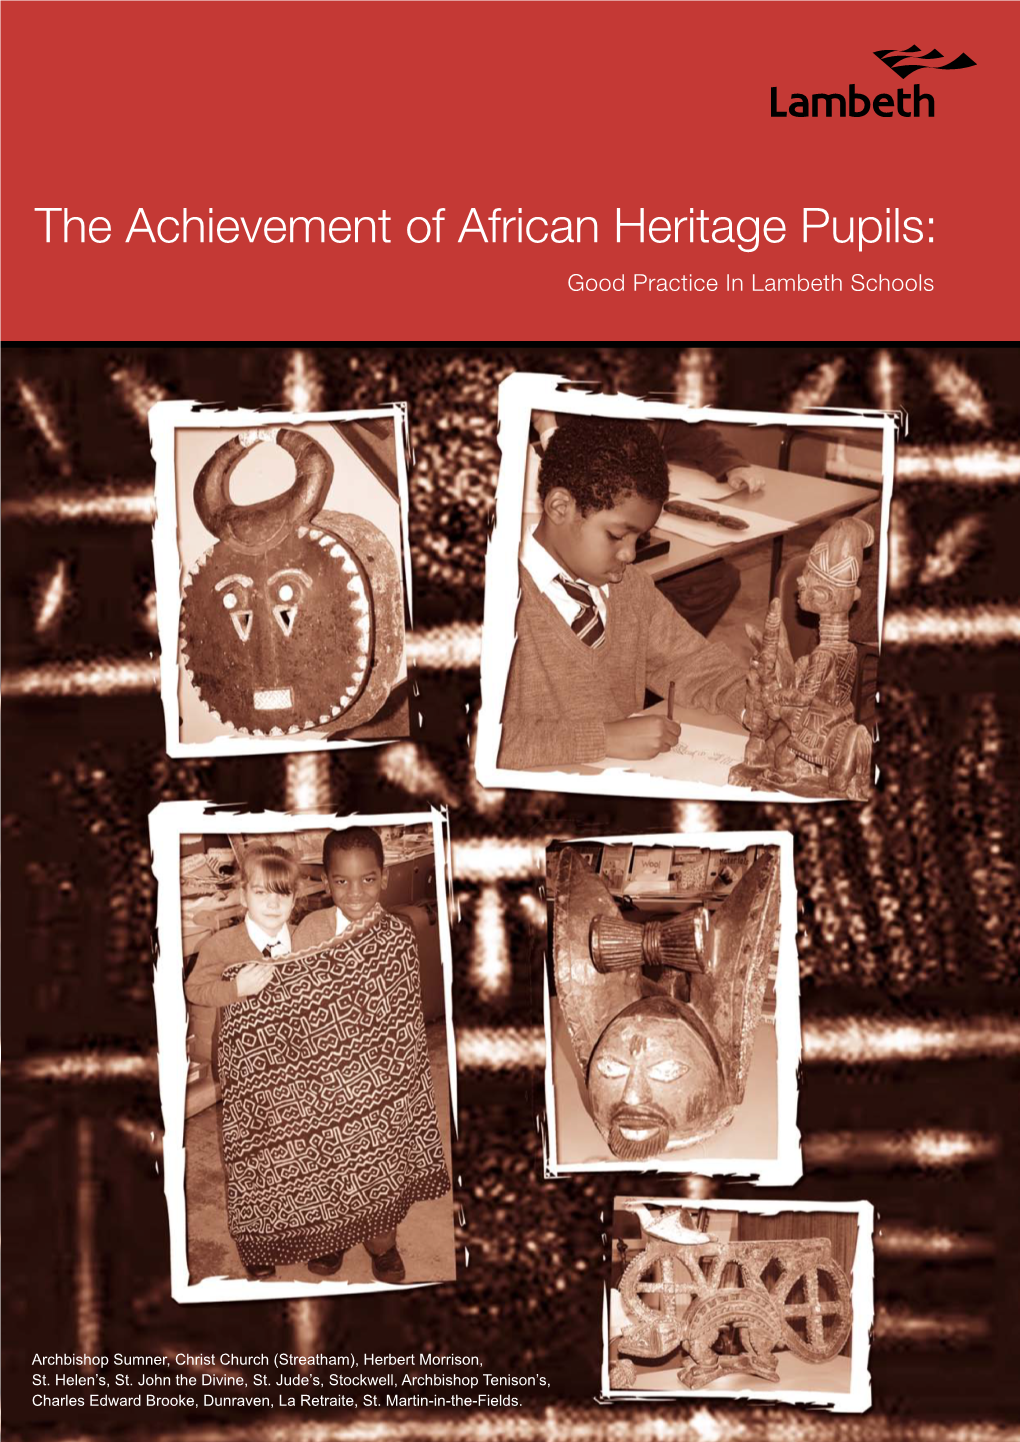 The Achievement of African Heritage Pupils